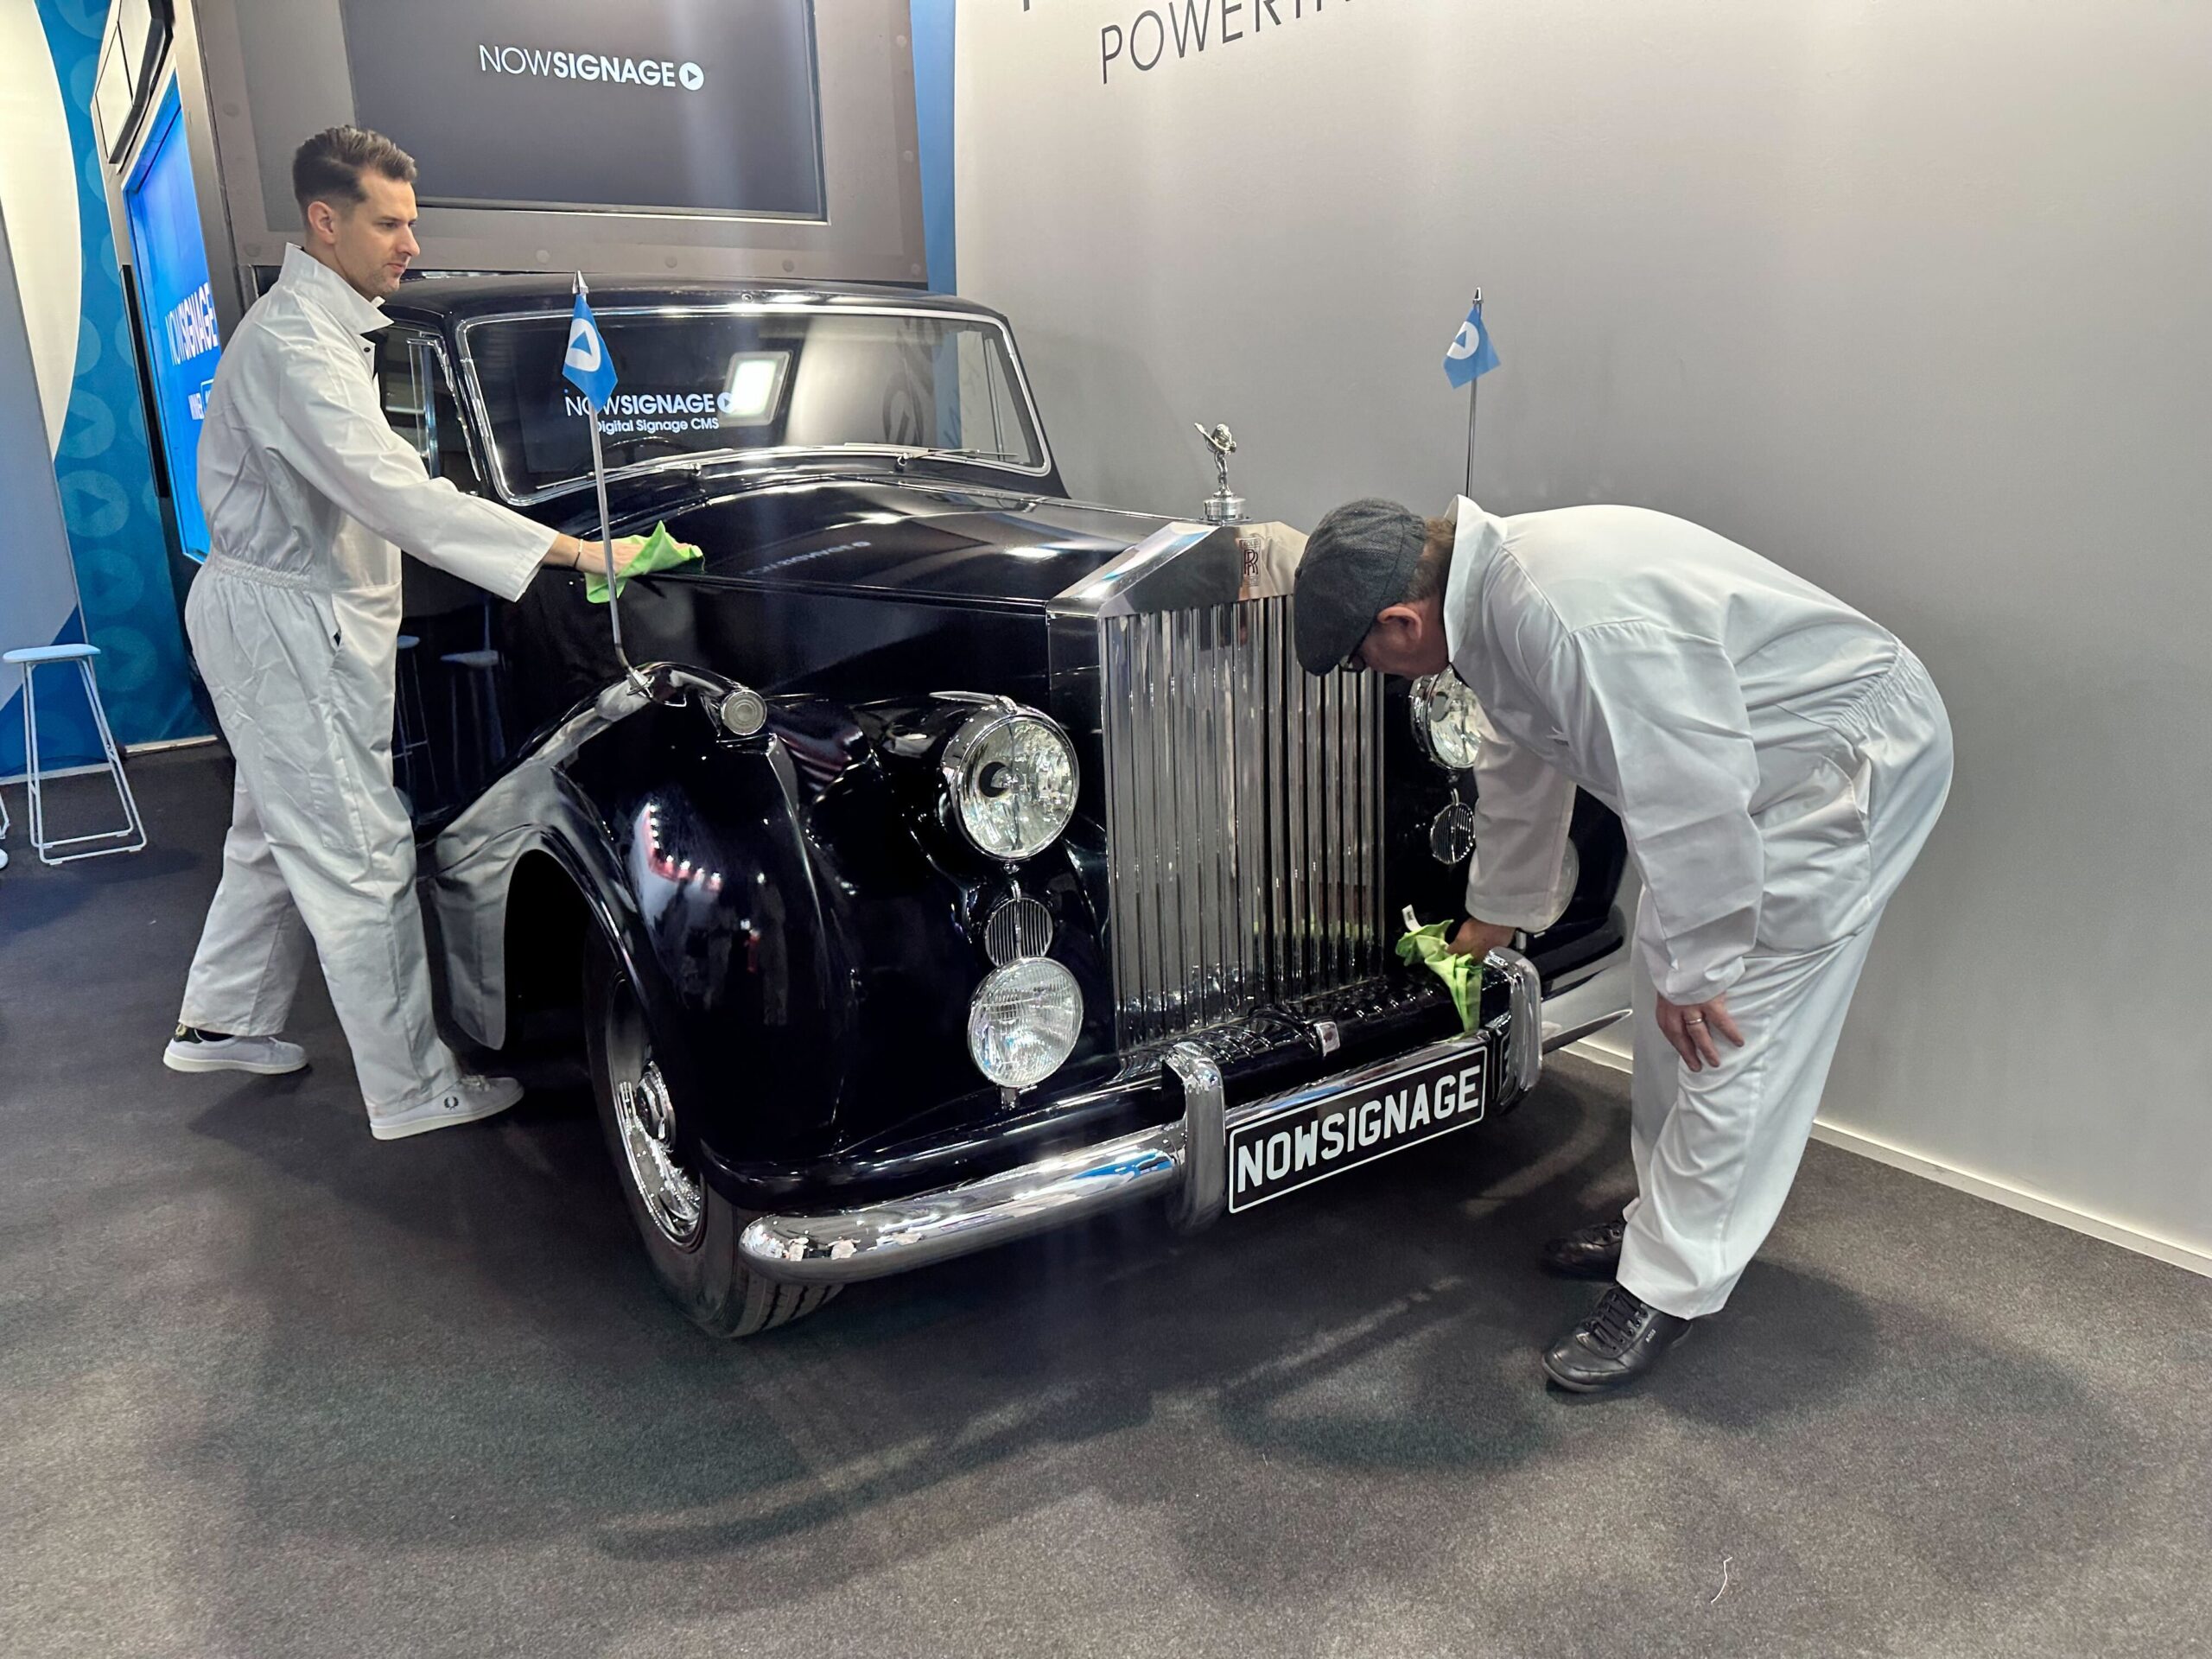 The Making of the Rolls Royce Digital Signage Car